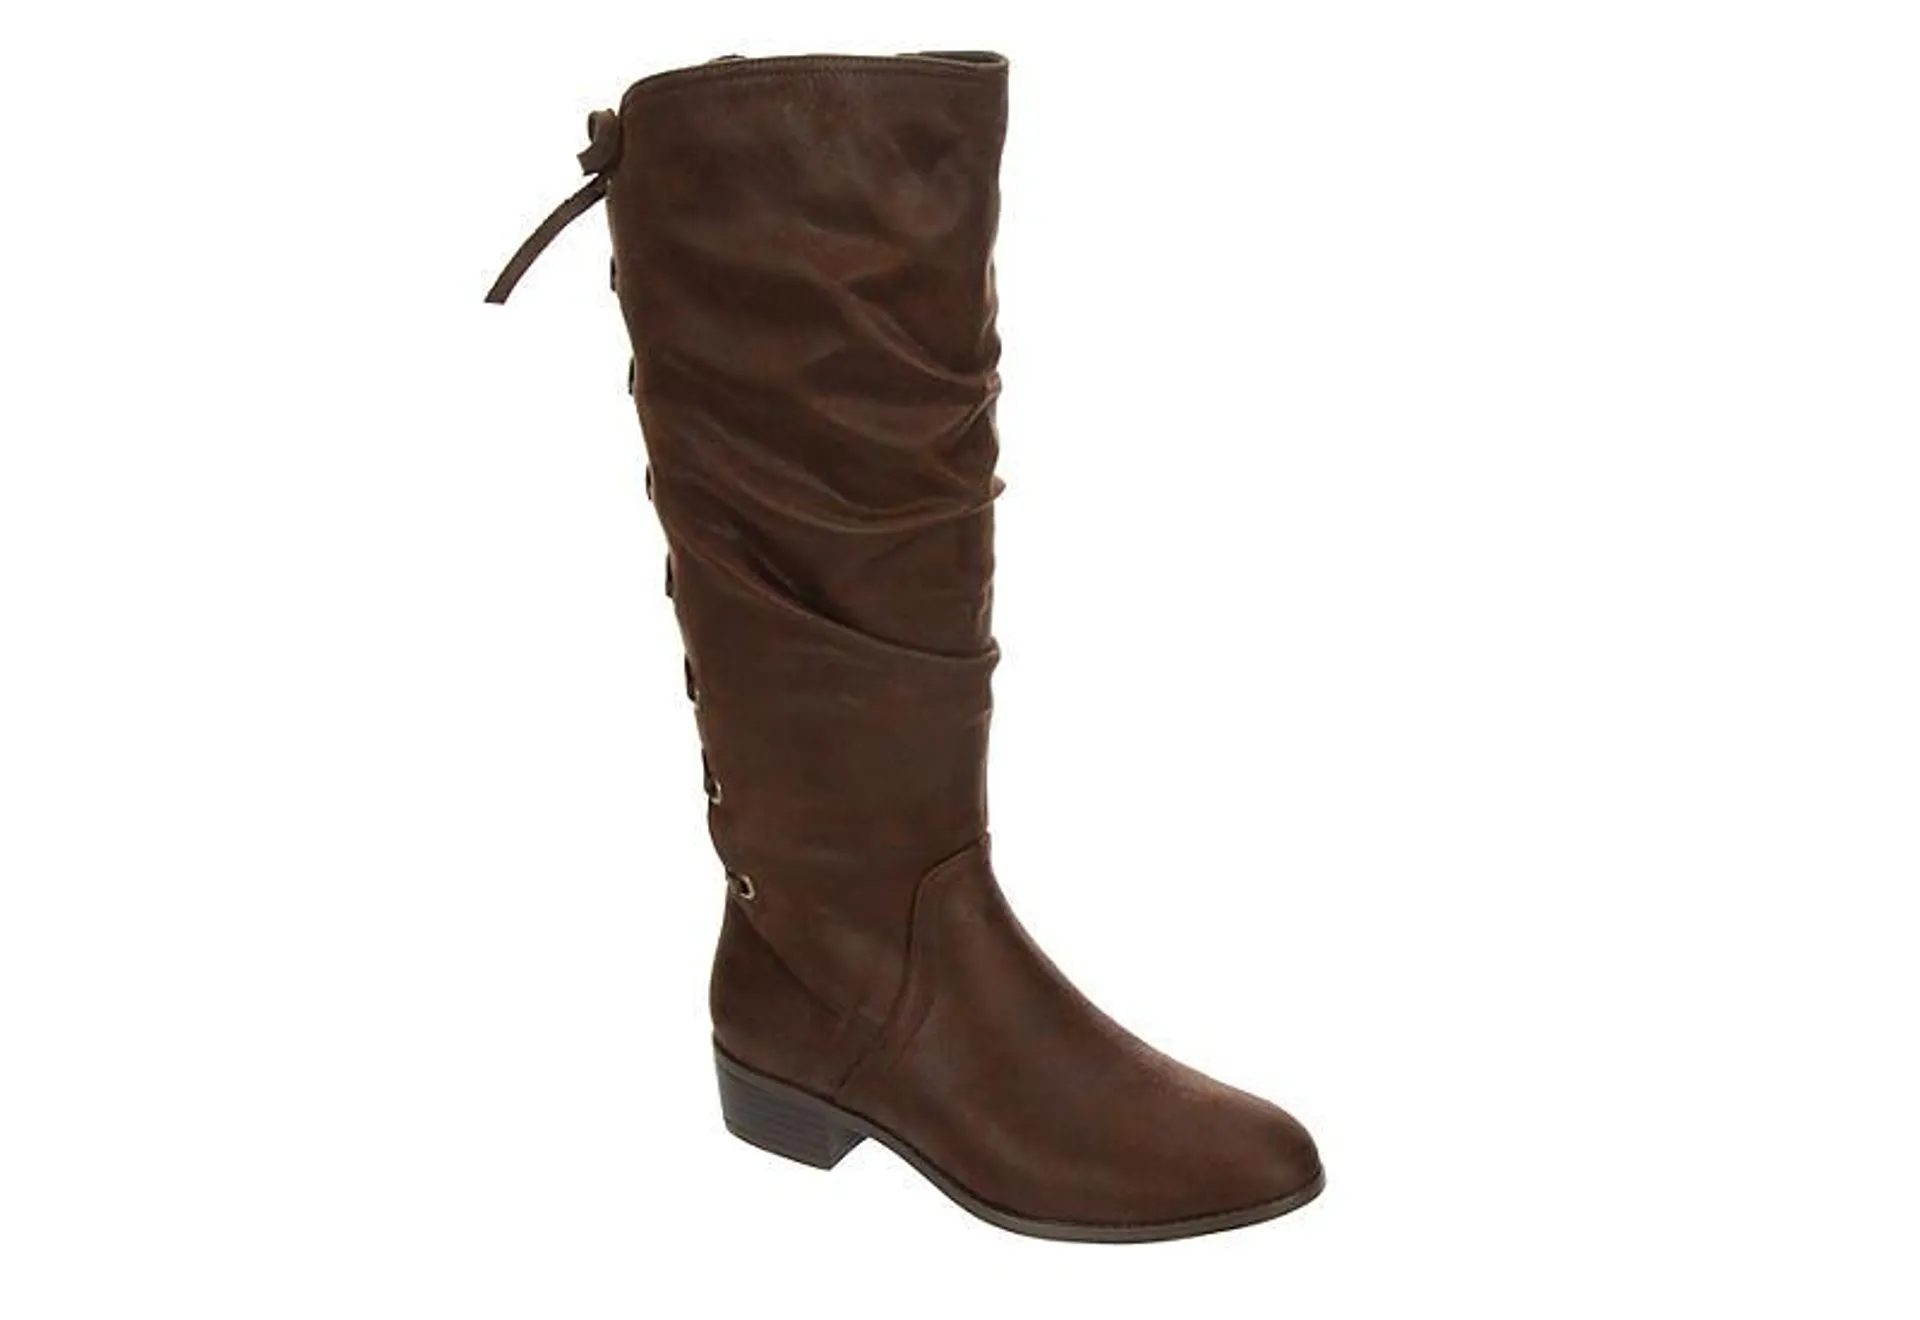 Xappeal Womens Cheyenne Tall Boot - Brown